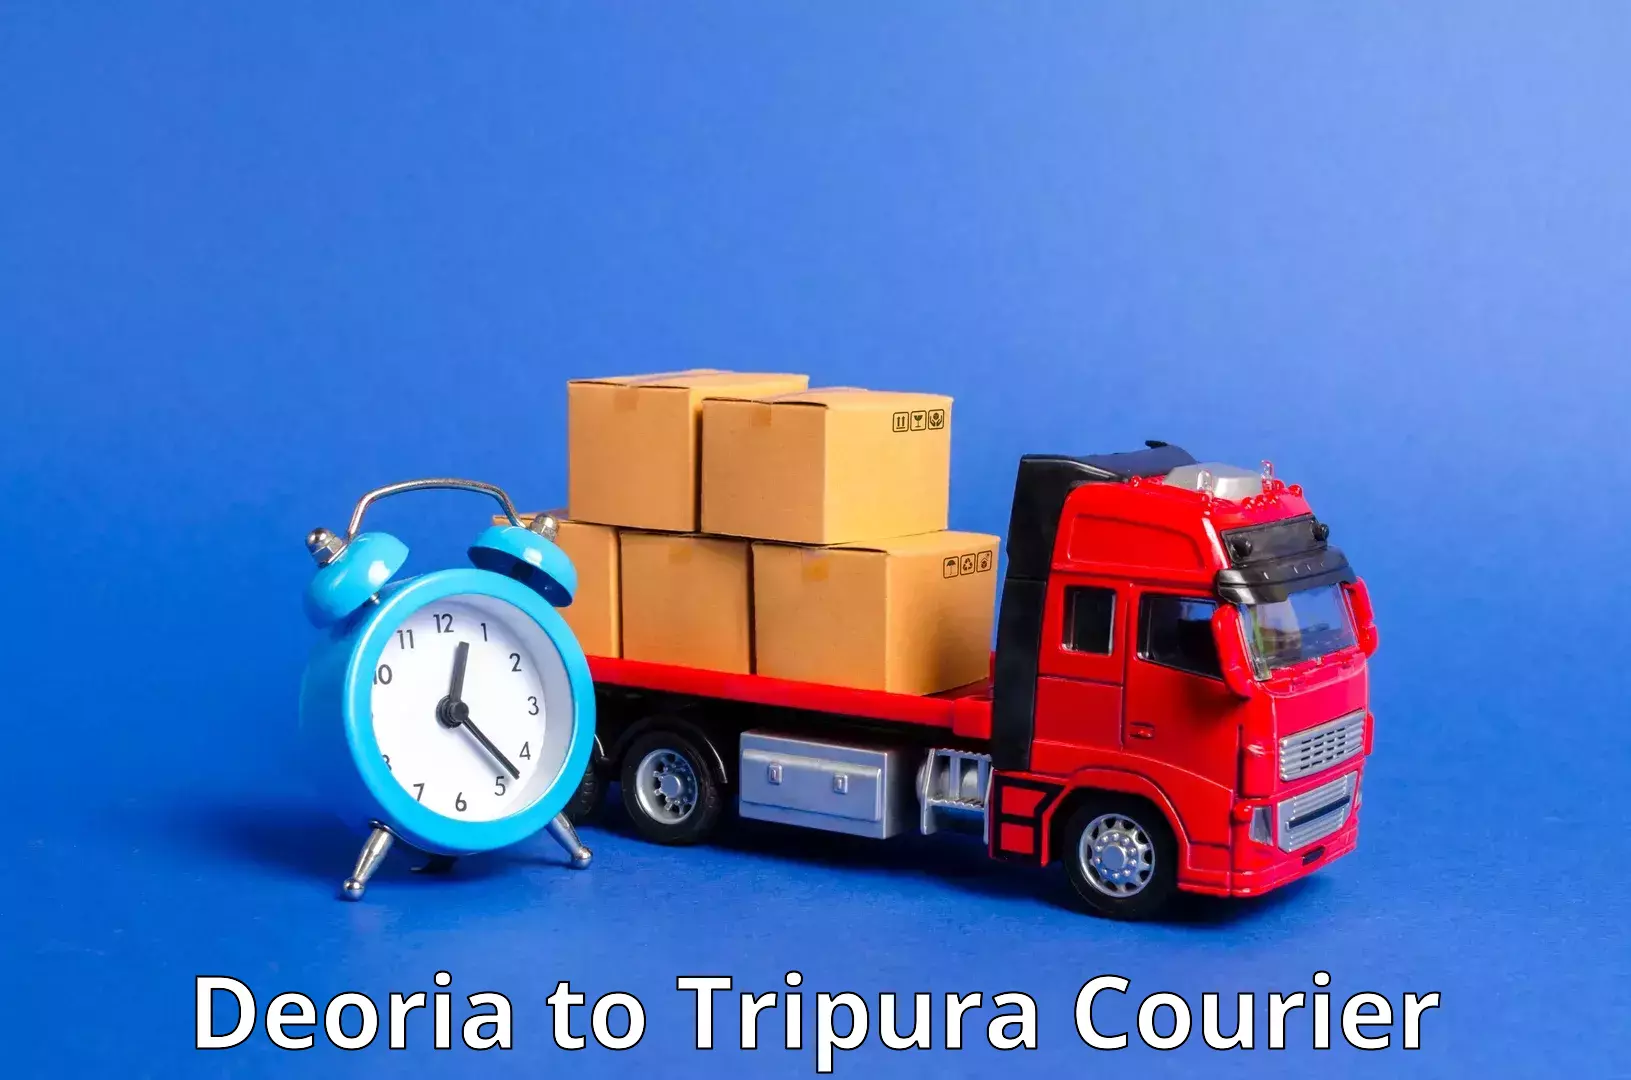 Advanced freight services in Deoria to Udaipur Tripura